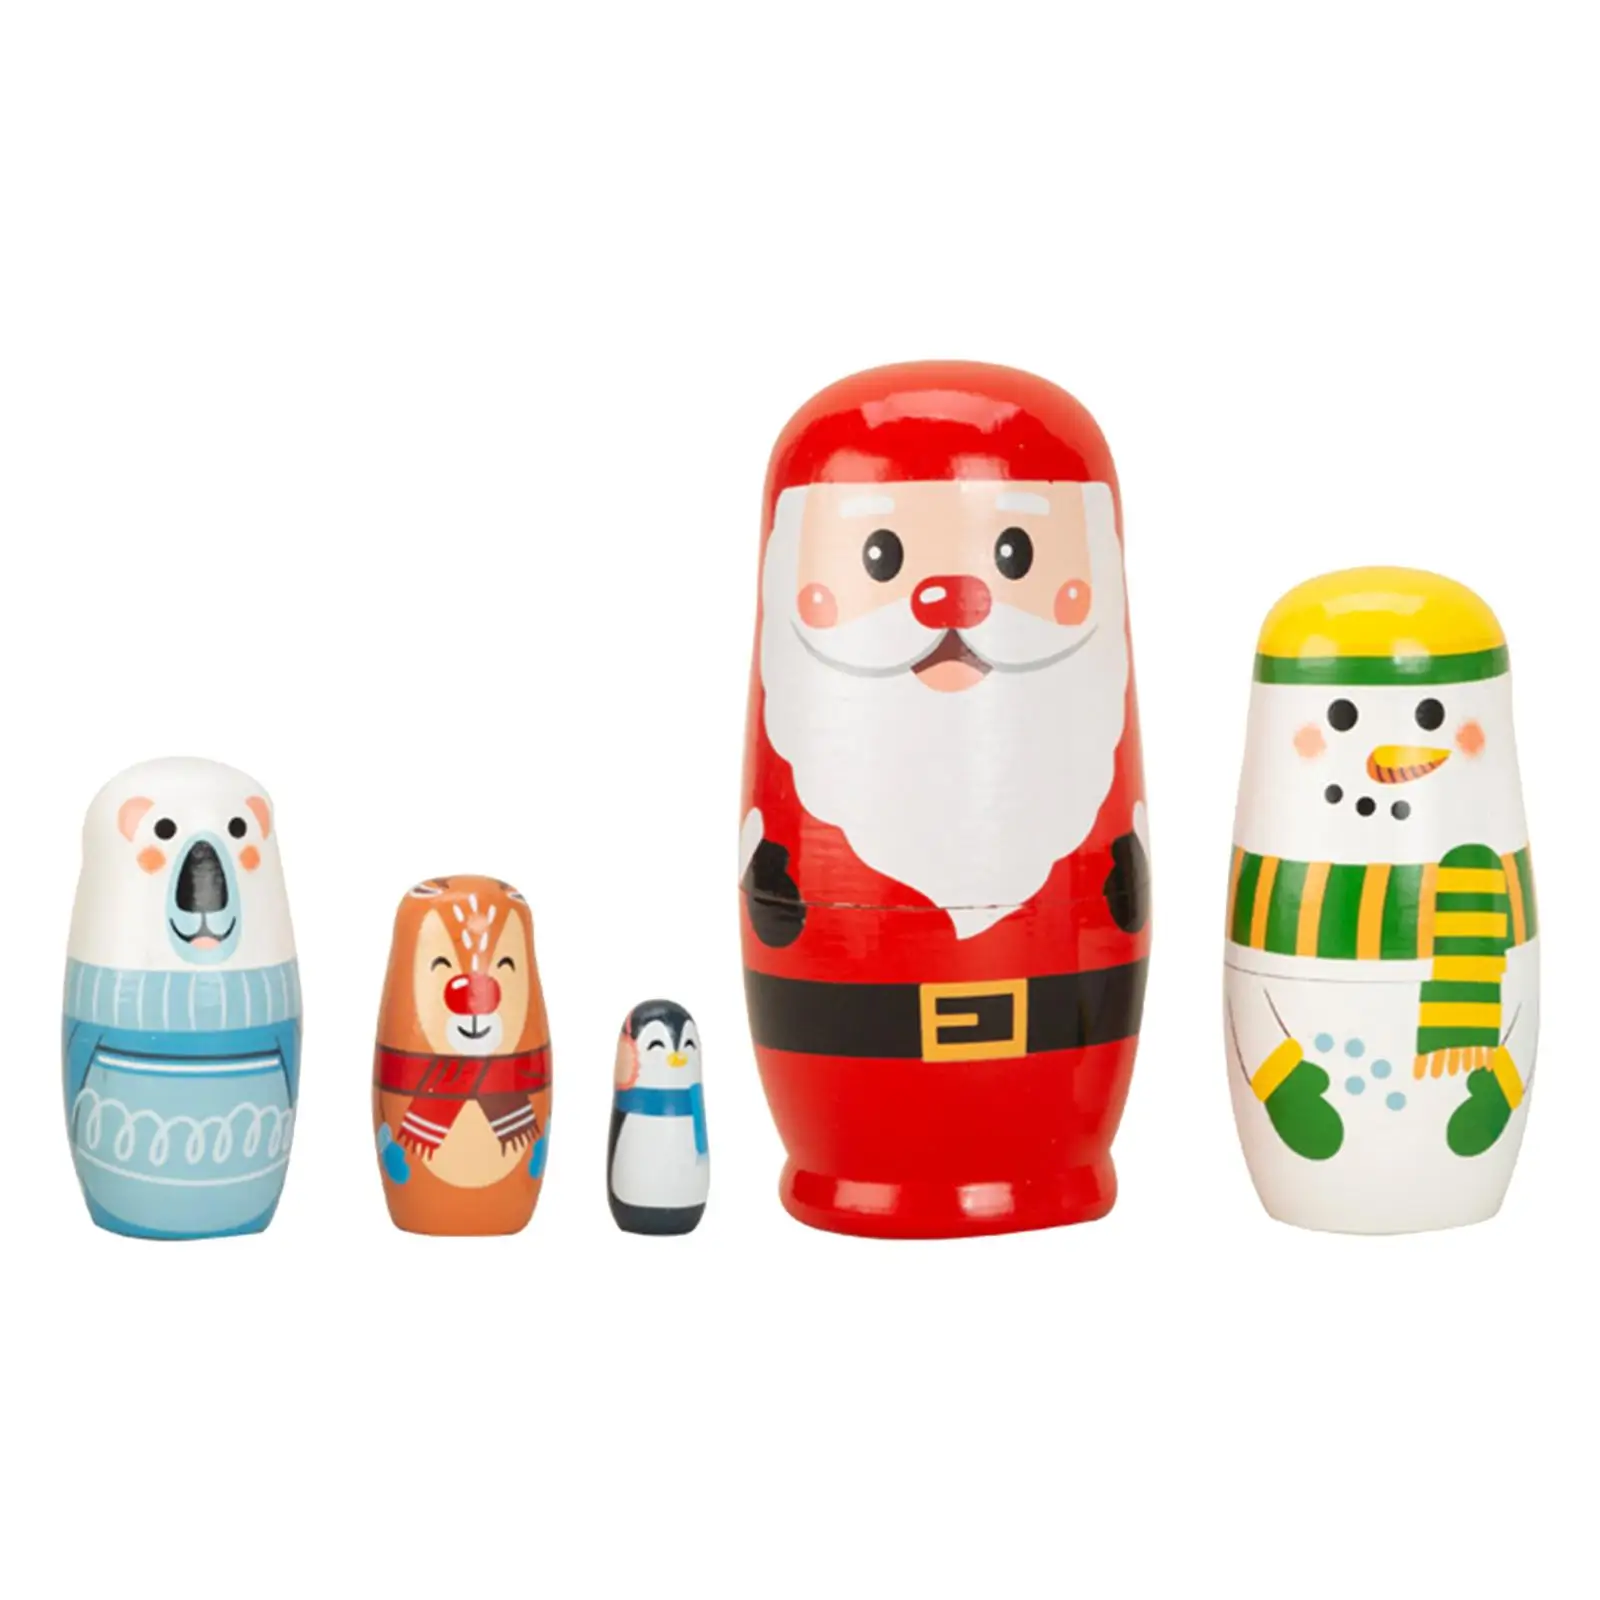 5Pcs Novelty Nesting Dolls Toy Crafted Doll Collectibles Matryoshka for Gift